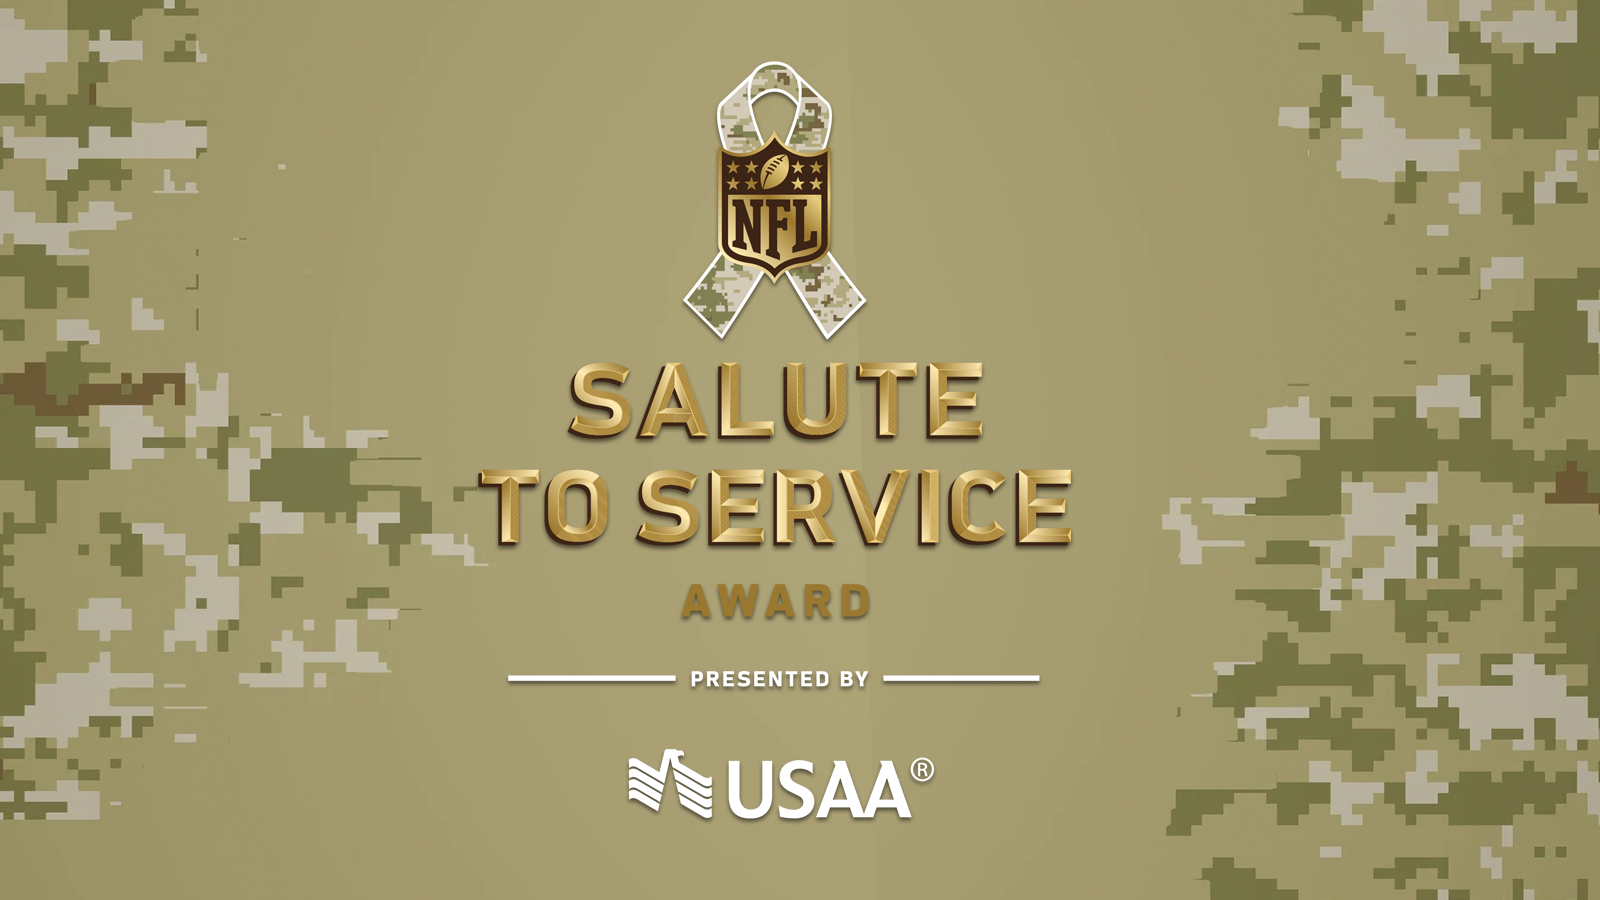 Everything you need to know about the NFL's Salute to Service Award